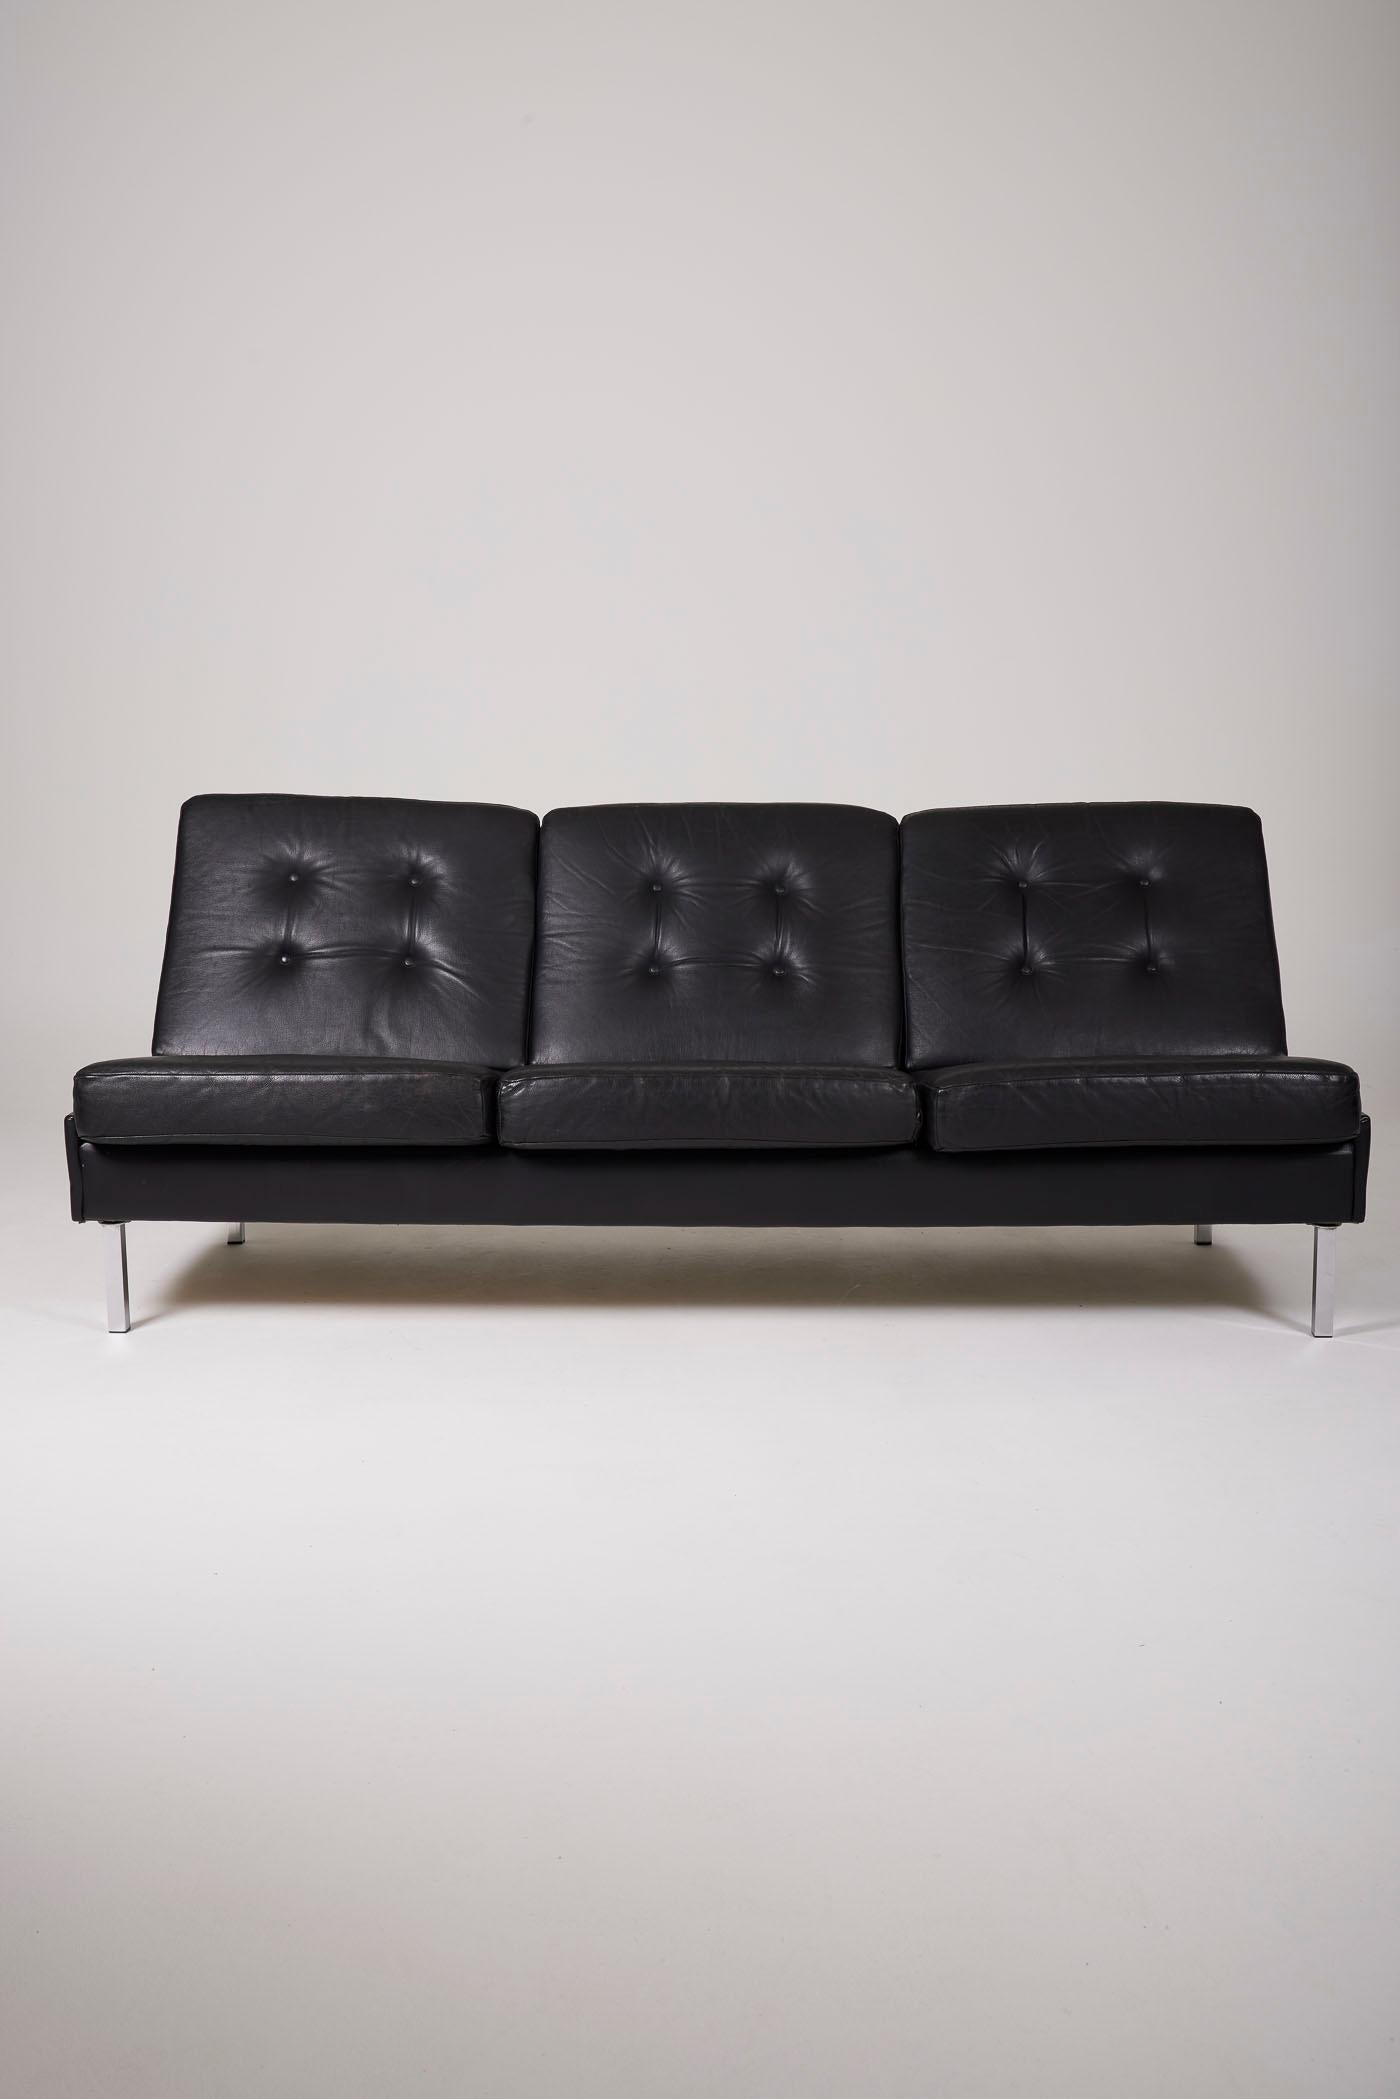 3-seater black leather sofa with tufted design and chrome legs from the 1970s. This model is also available in a 2-seater version. In perfect condition.
DV413